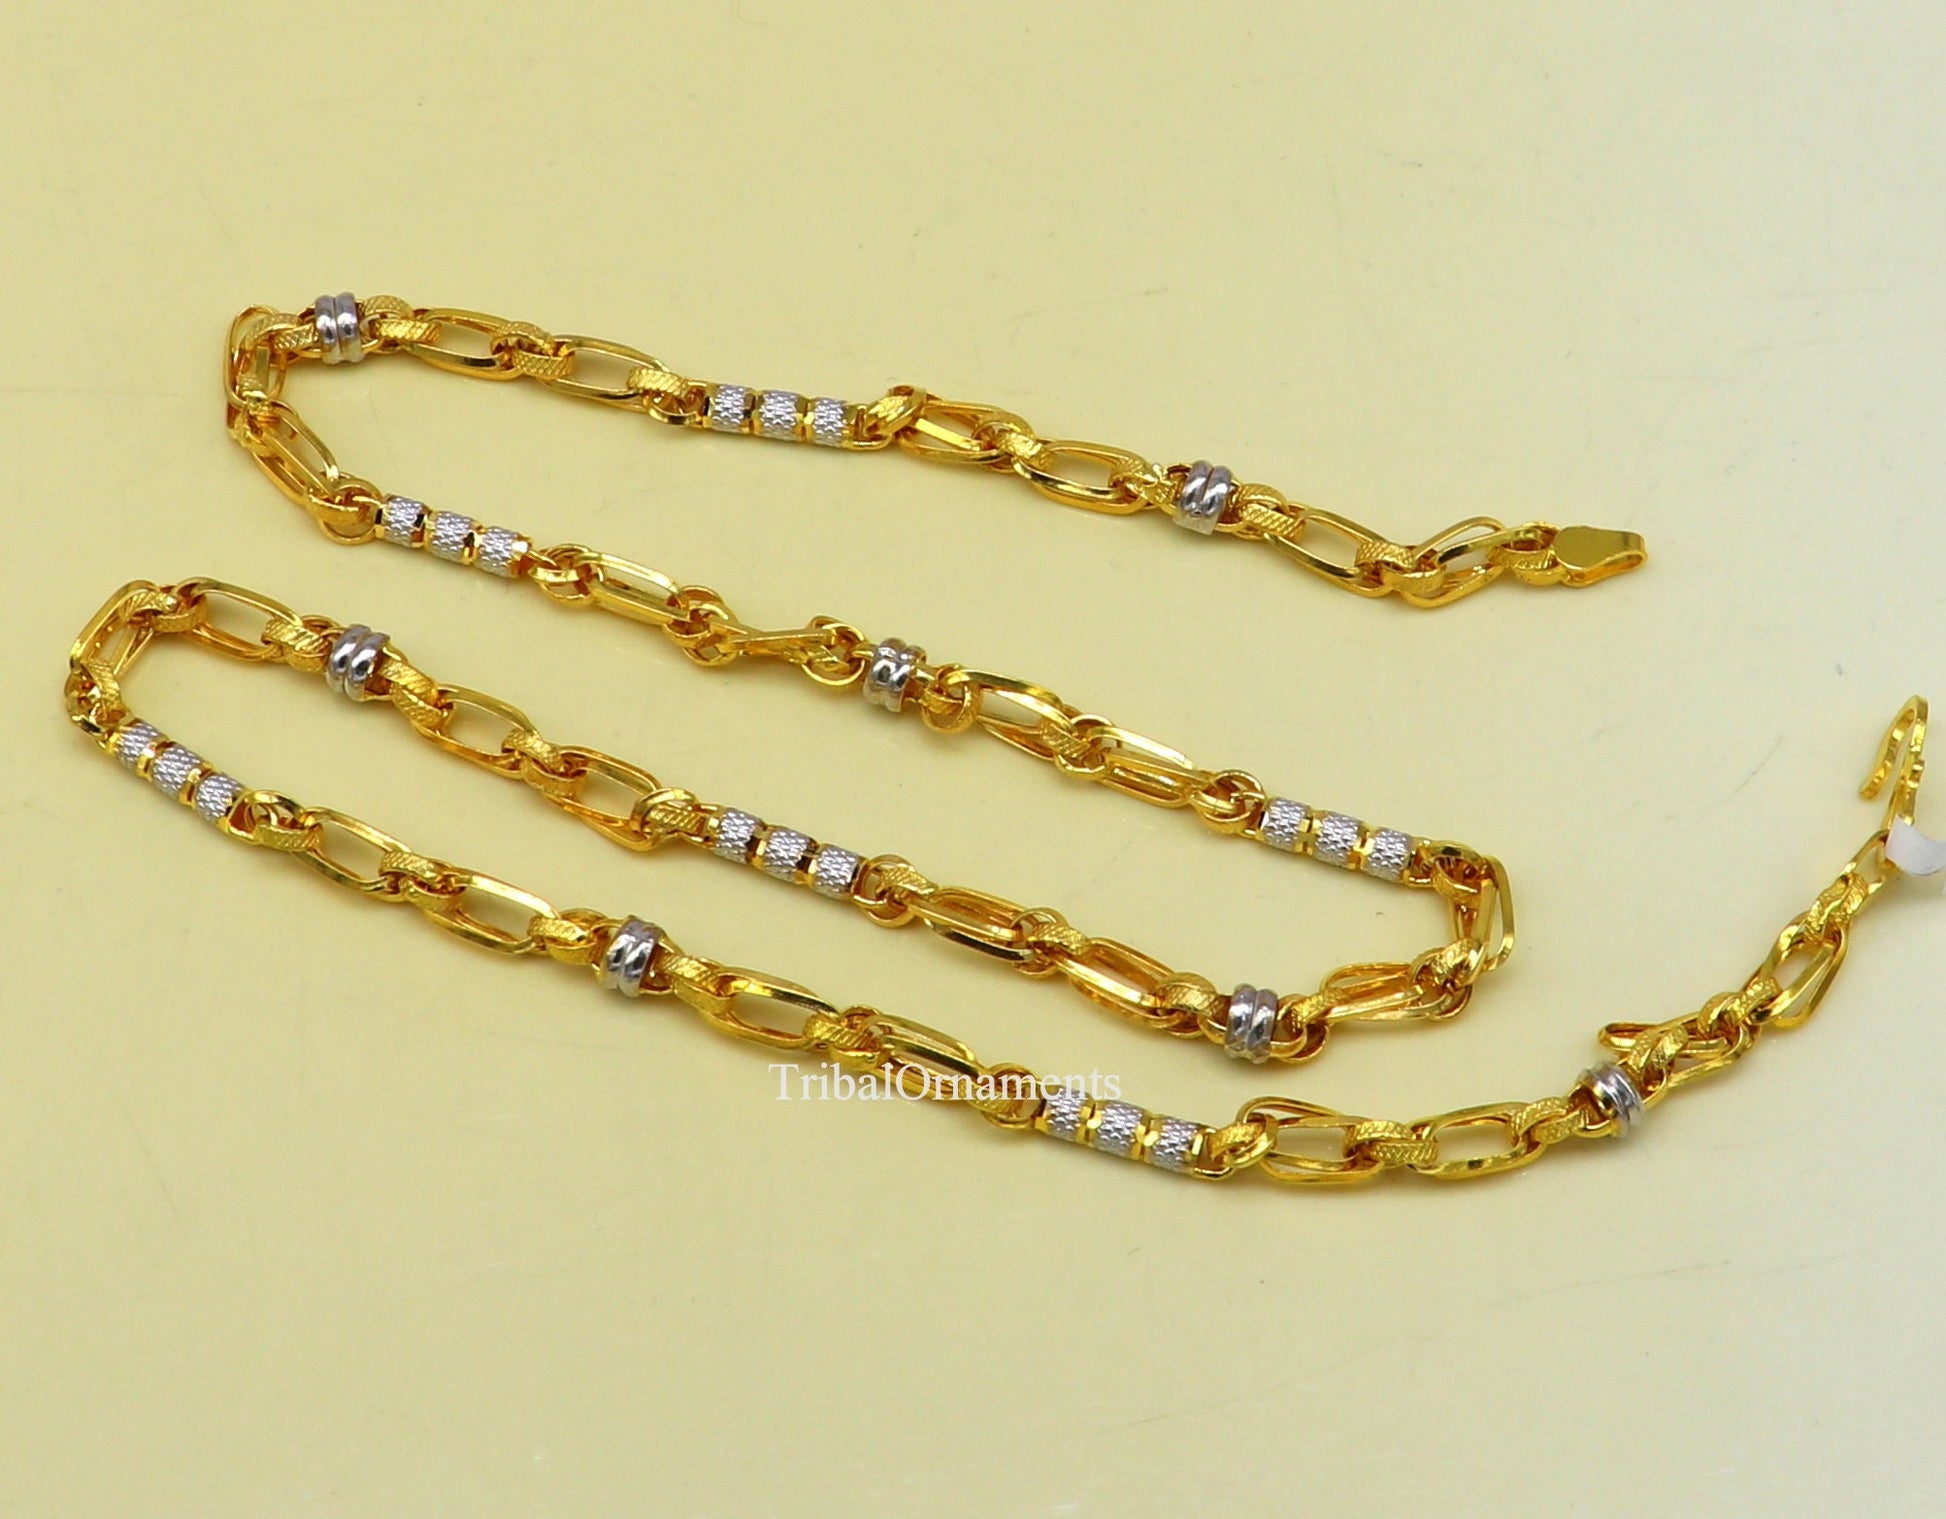 22kt yellow gold handmade gorgeous Customized necklace chain, best gift for unsex, royal India custom jewelry ch234 - TRIBAL ORNAMENTS